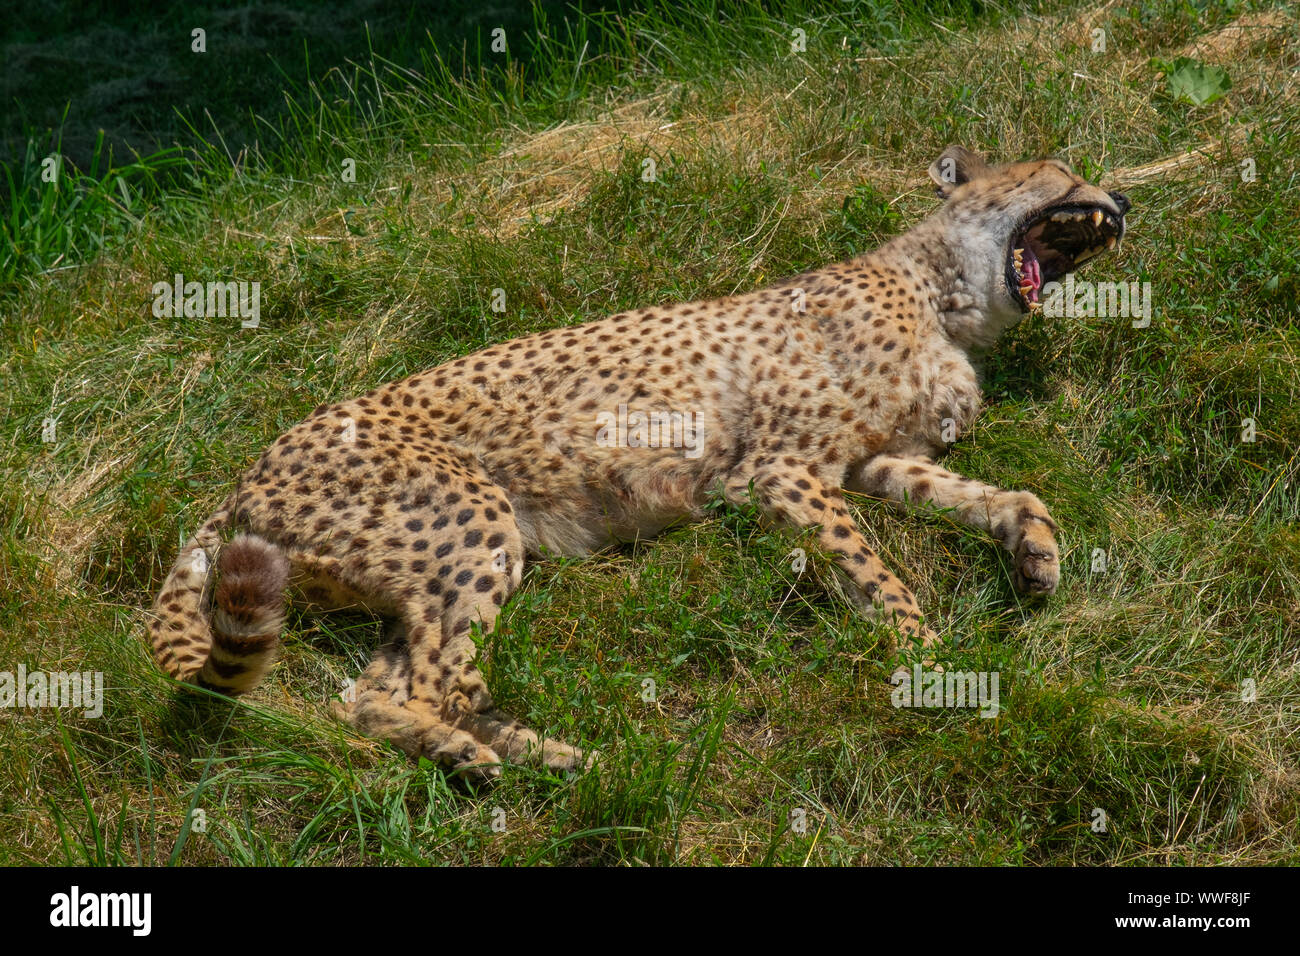 An exhausted cheetah gives a dramatic yawn. Stock Photo